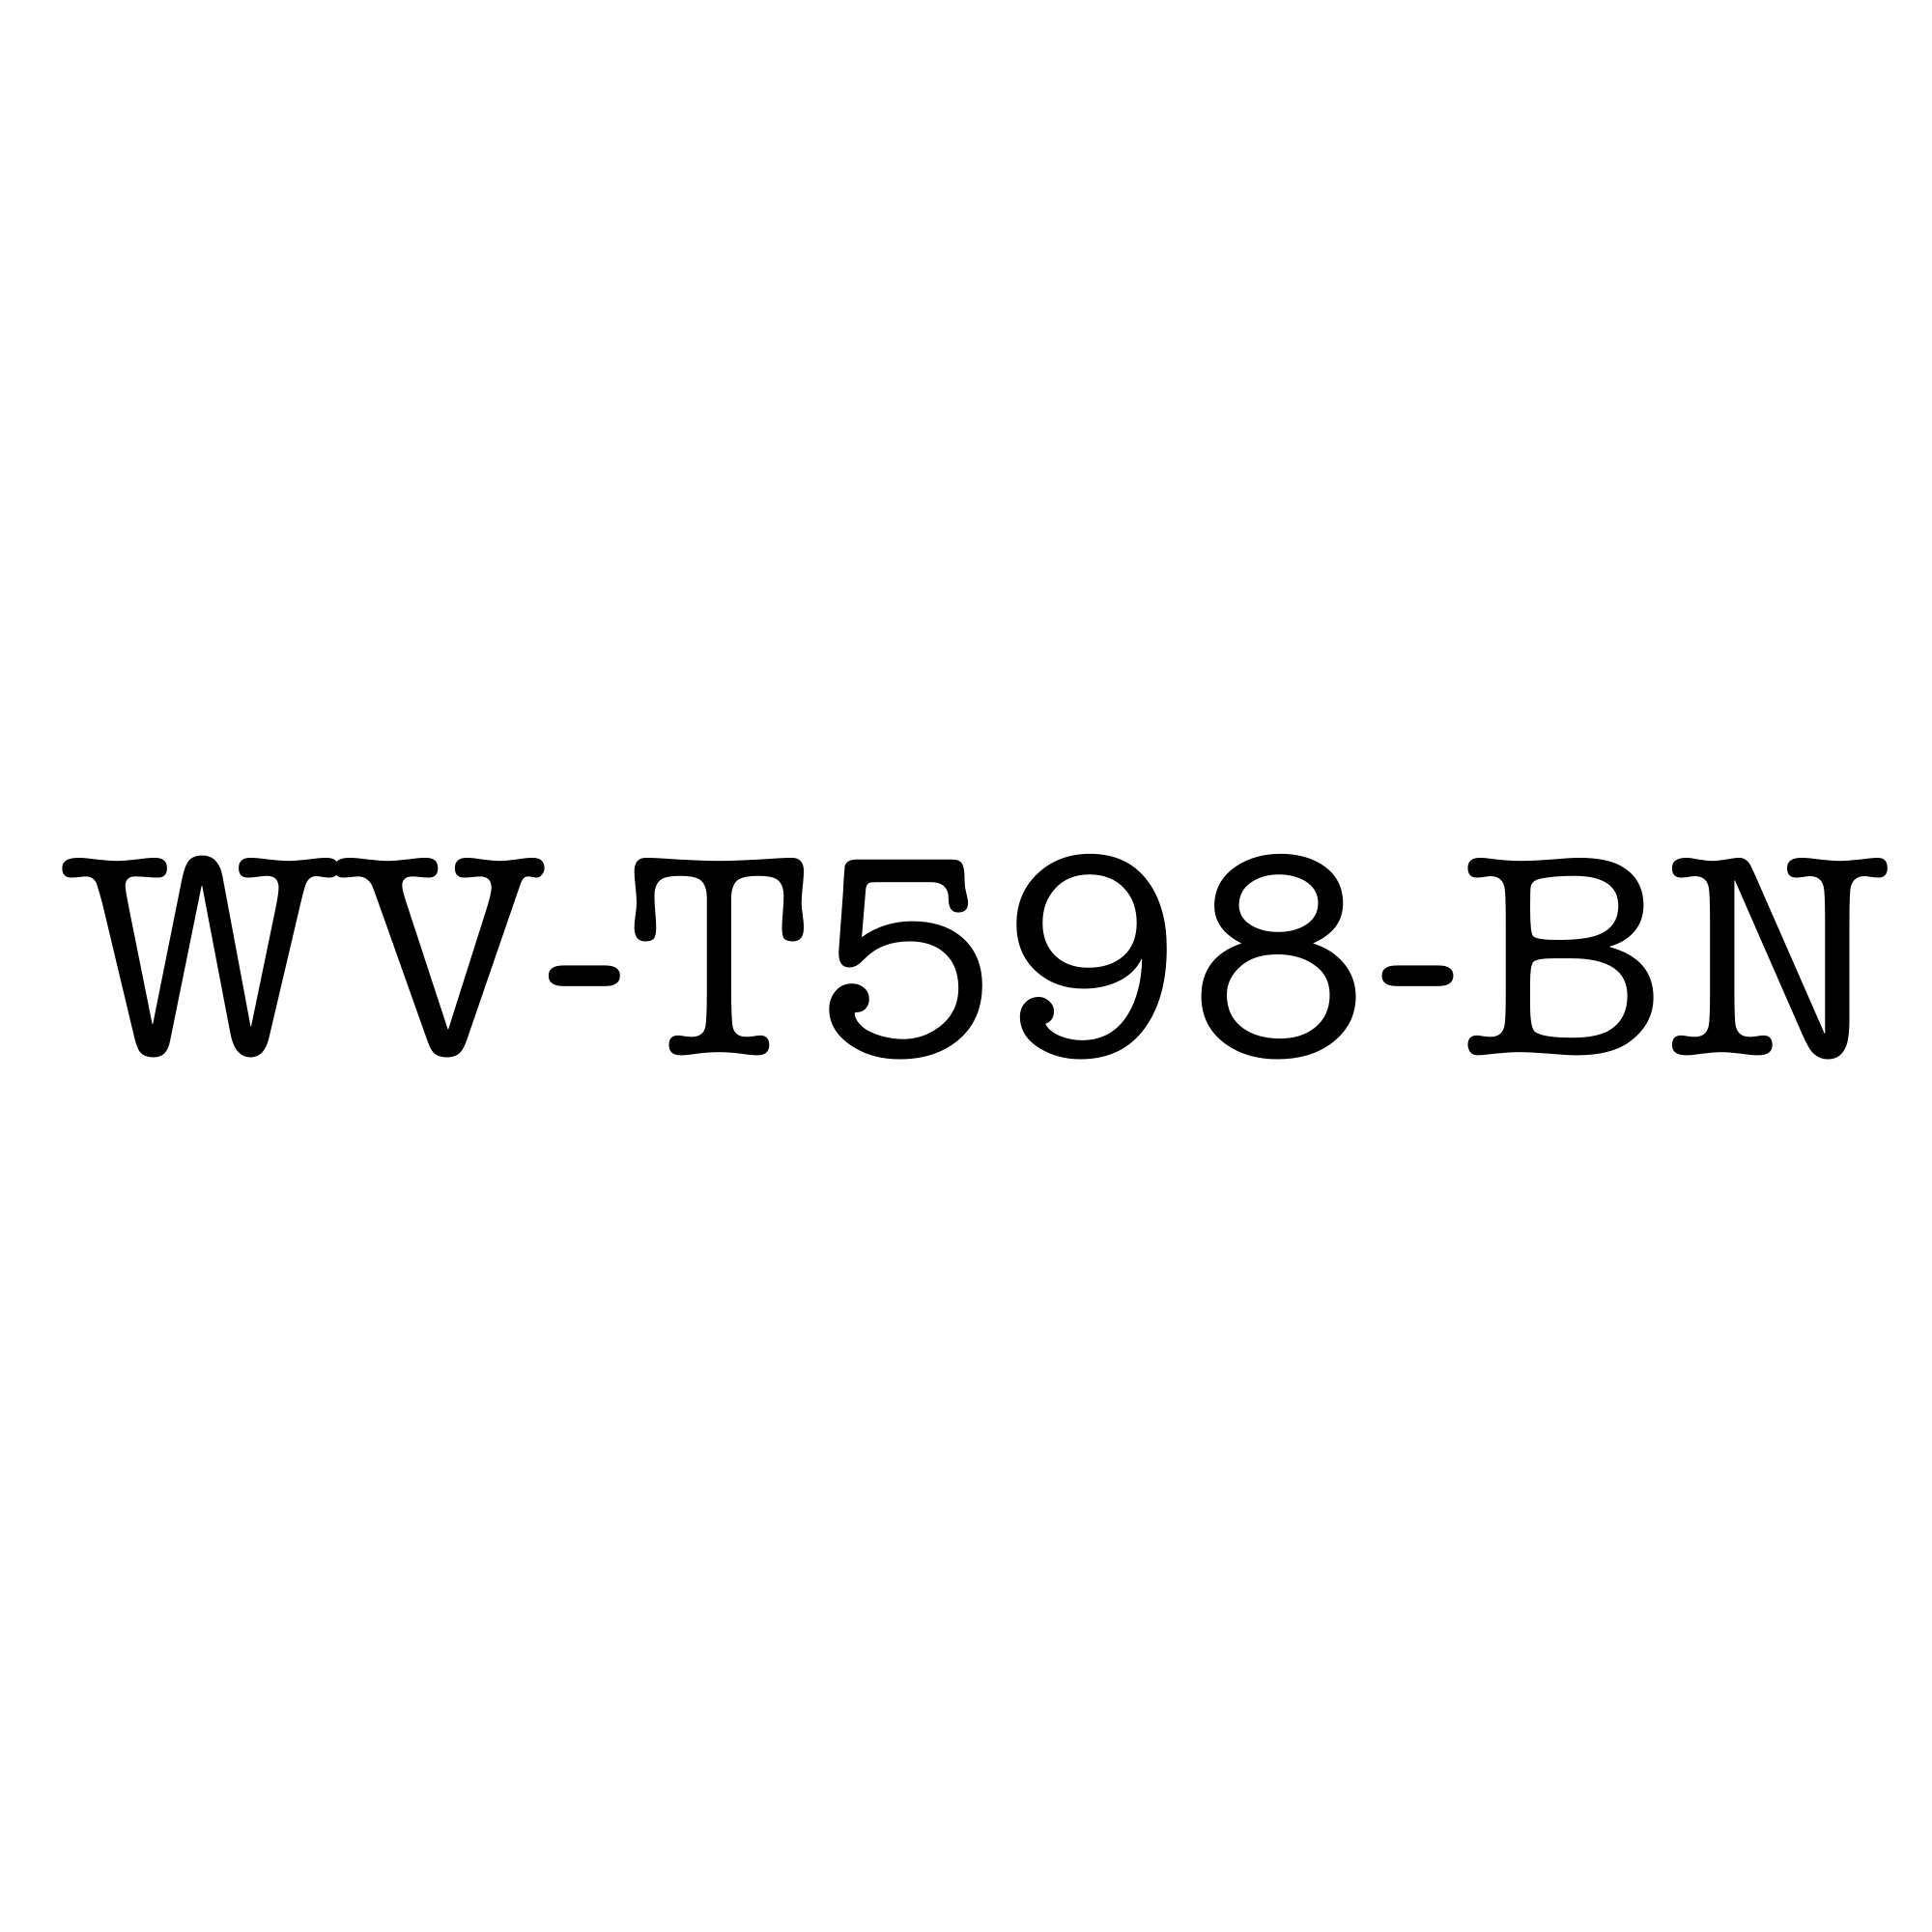 Boat Registration Decal - One Pair B9